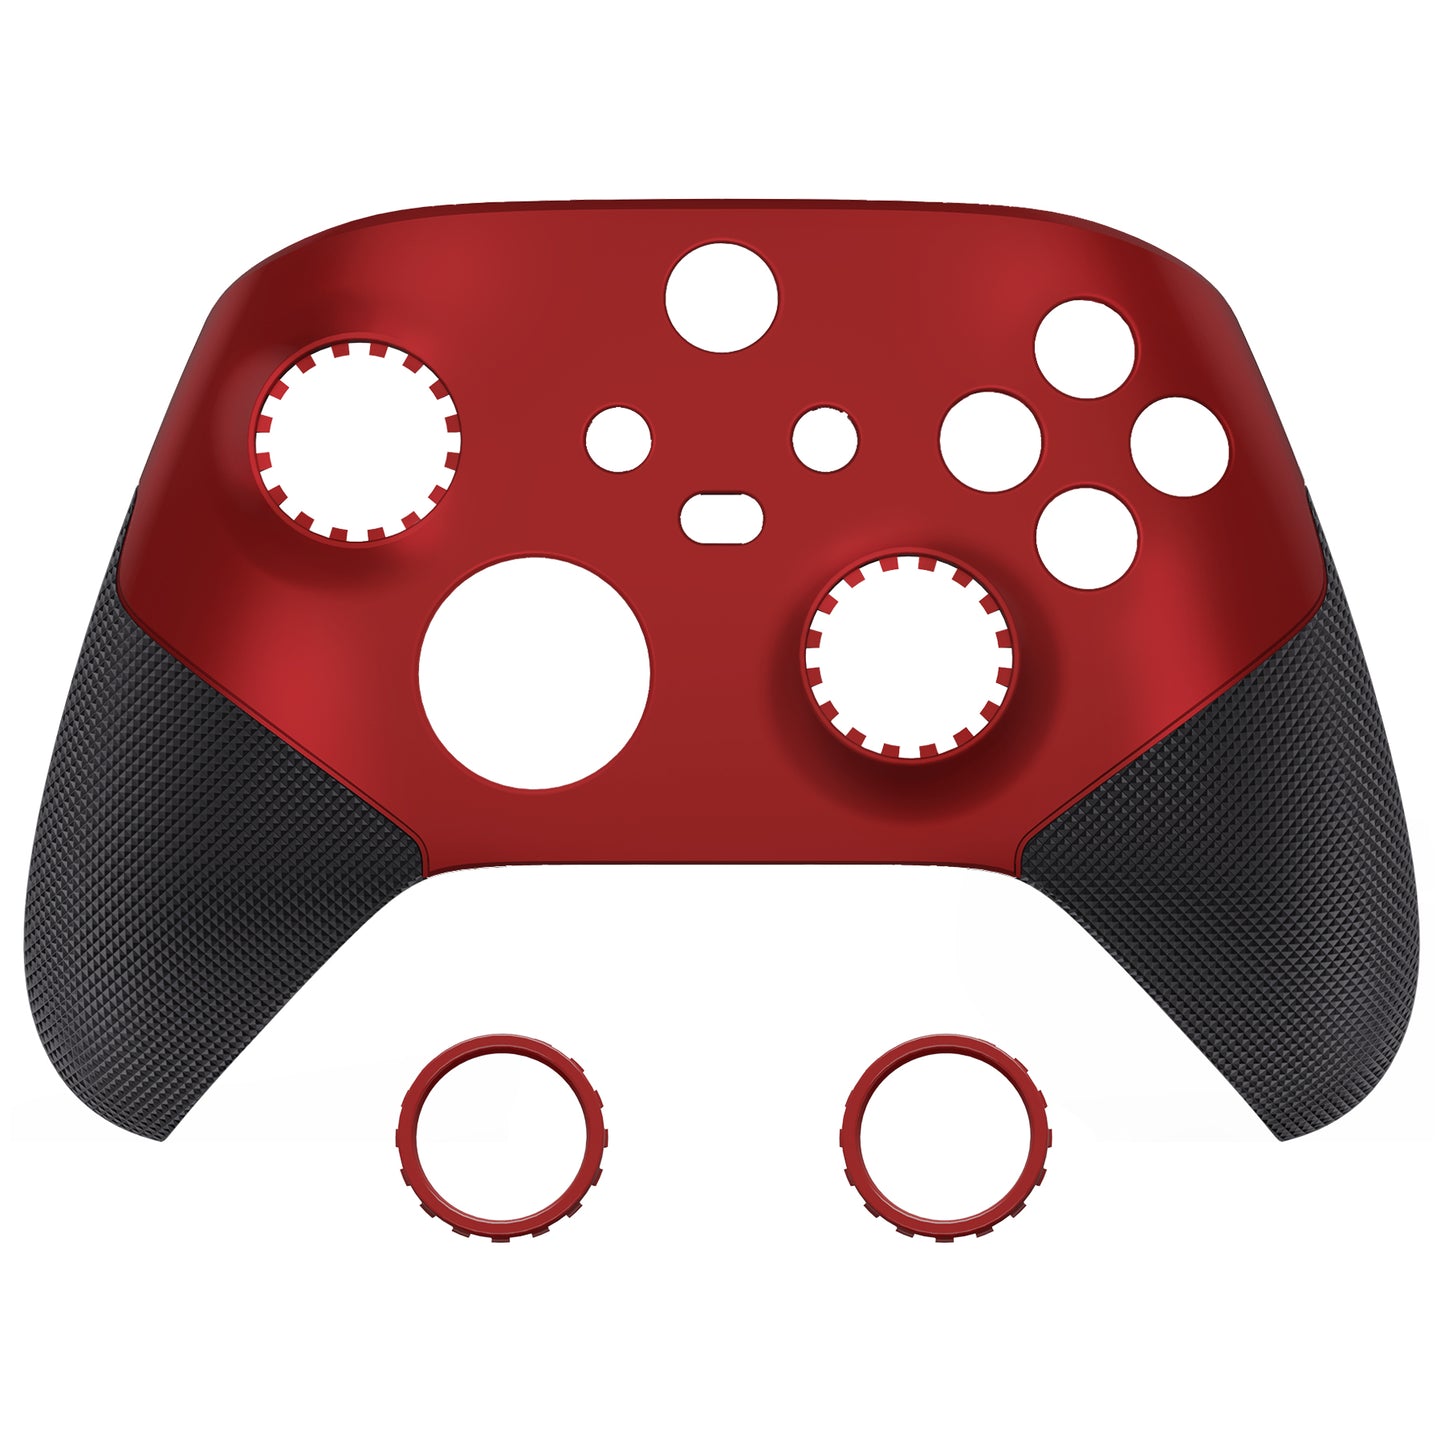 eXtremeRate ASR Version Performance Rubberized Grip Front Housing Shell  with Accent Rings for Xbox Series X & S Controller - Rubberized Scarlet Red & Black eXtremeRate